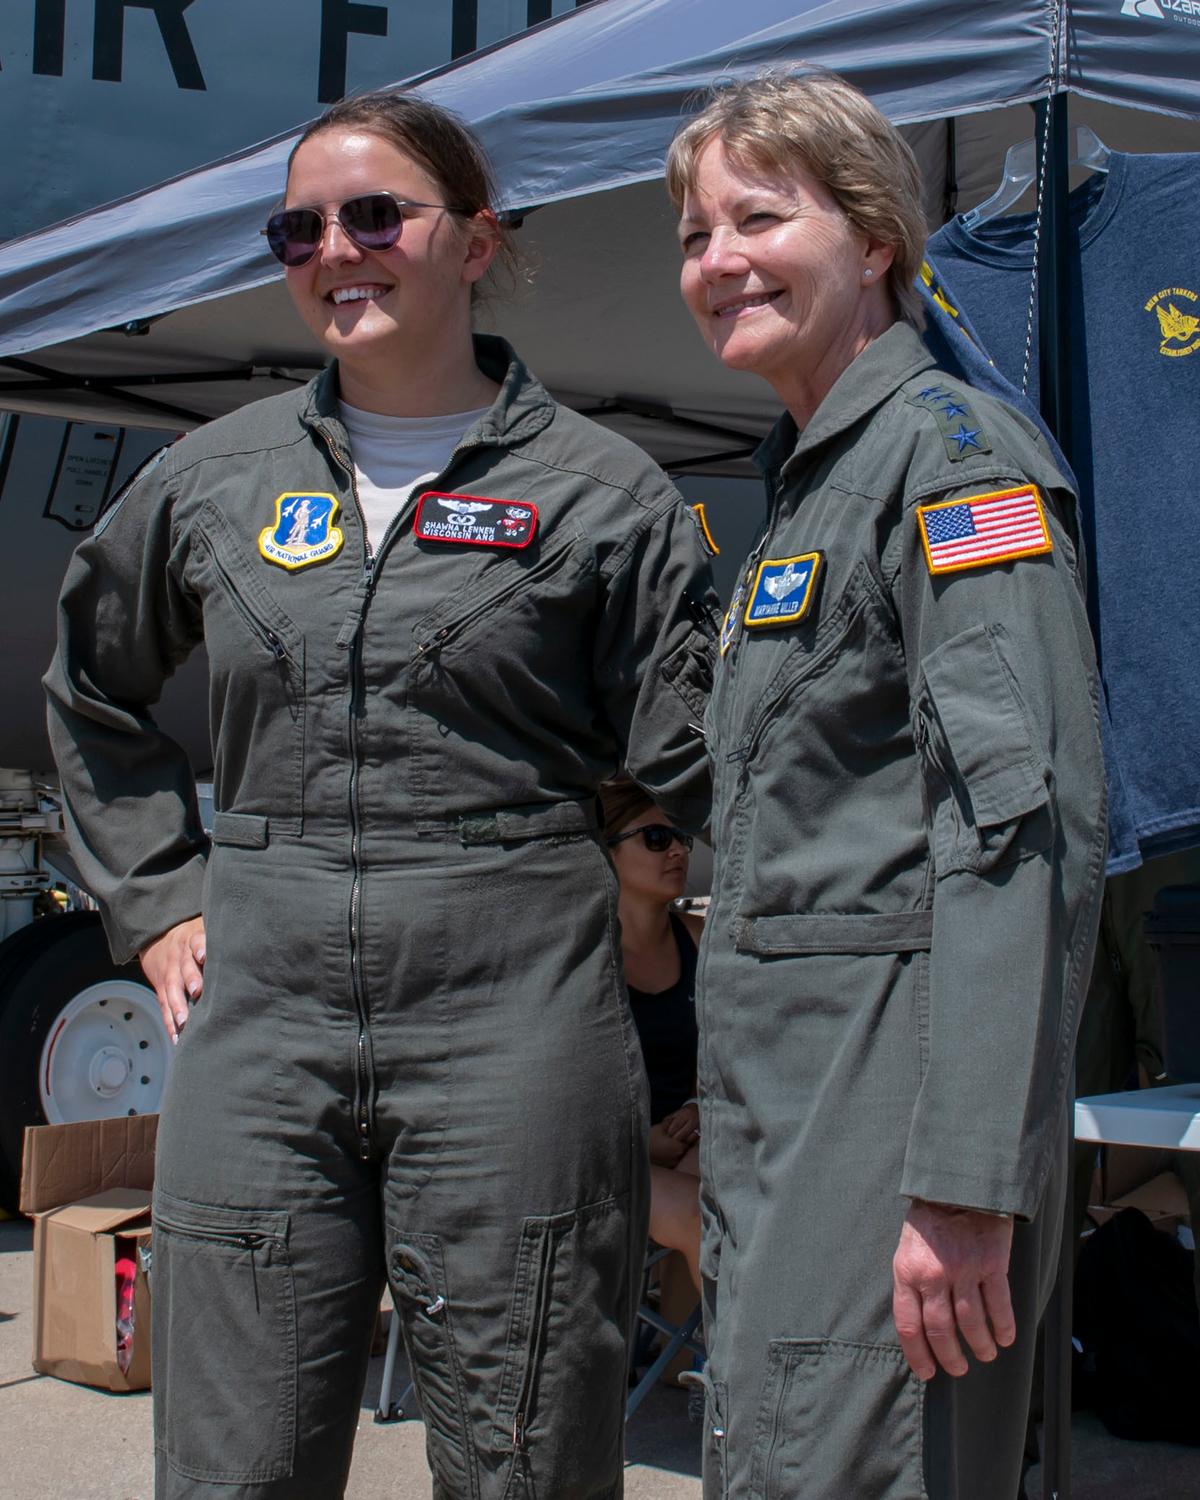 U.S. Air Force 2nd Lt. Shawna Lennen poses for a photo with U.S. Air Force Gen. Maryanne Miller at EAA AirVenture July 27, 2019, in Oshkosh, Wisconsin. (<a href="https://www.dvidshub.net/image/5630238/service-members-provide-support-eaa-airventure">Senior Airman Cameron Lewis</a>/DVIDSHUB)